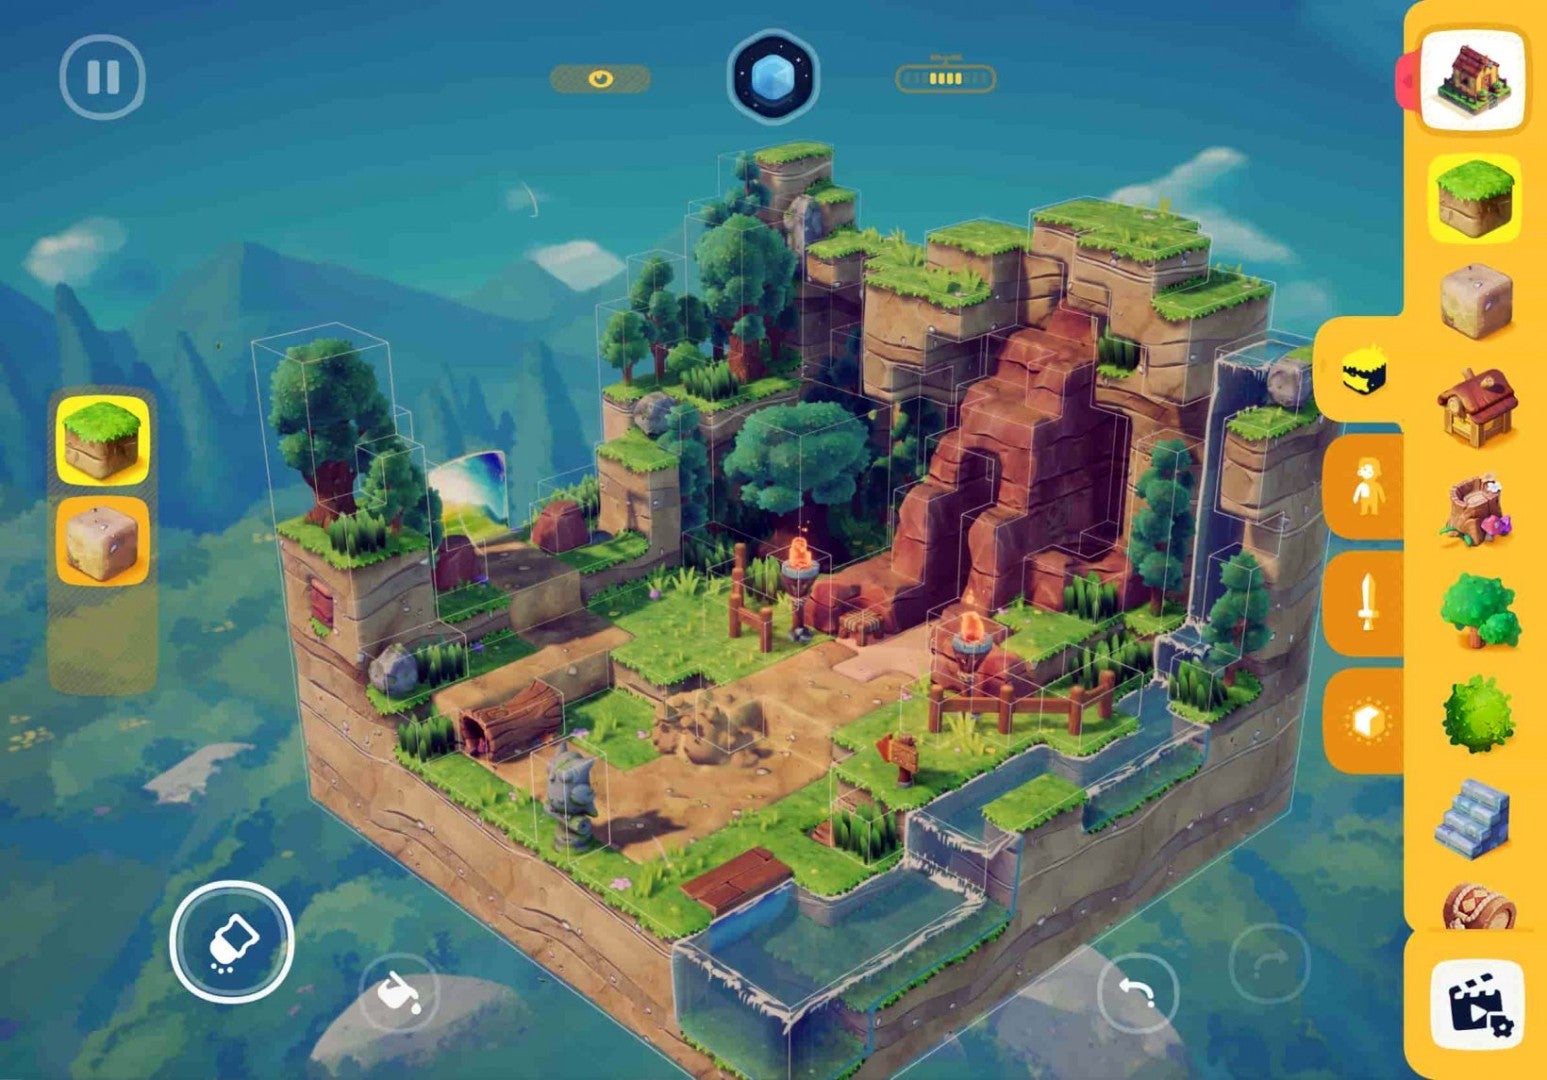  A simple editor makes it pretty easy to create and share little worlds. (Screenshot: Aquiris Game Studio)